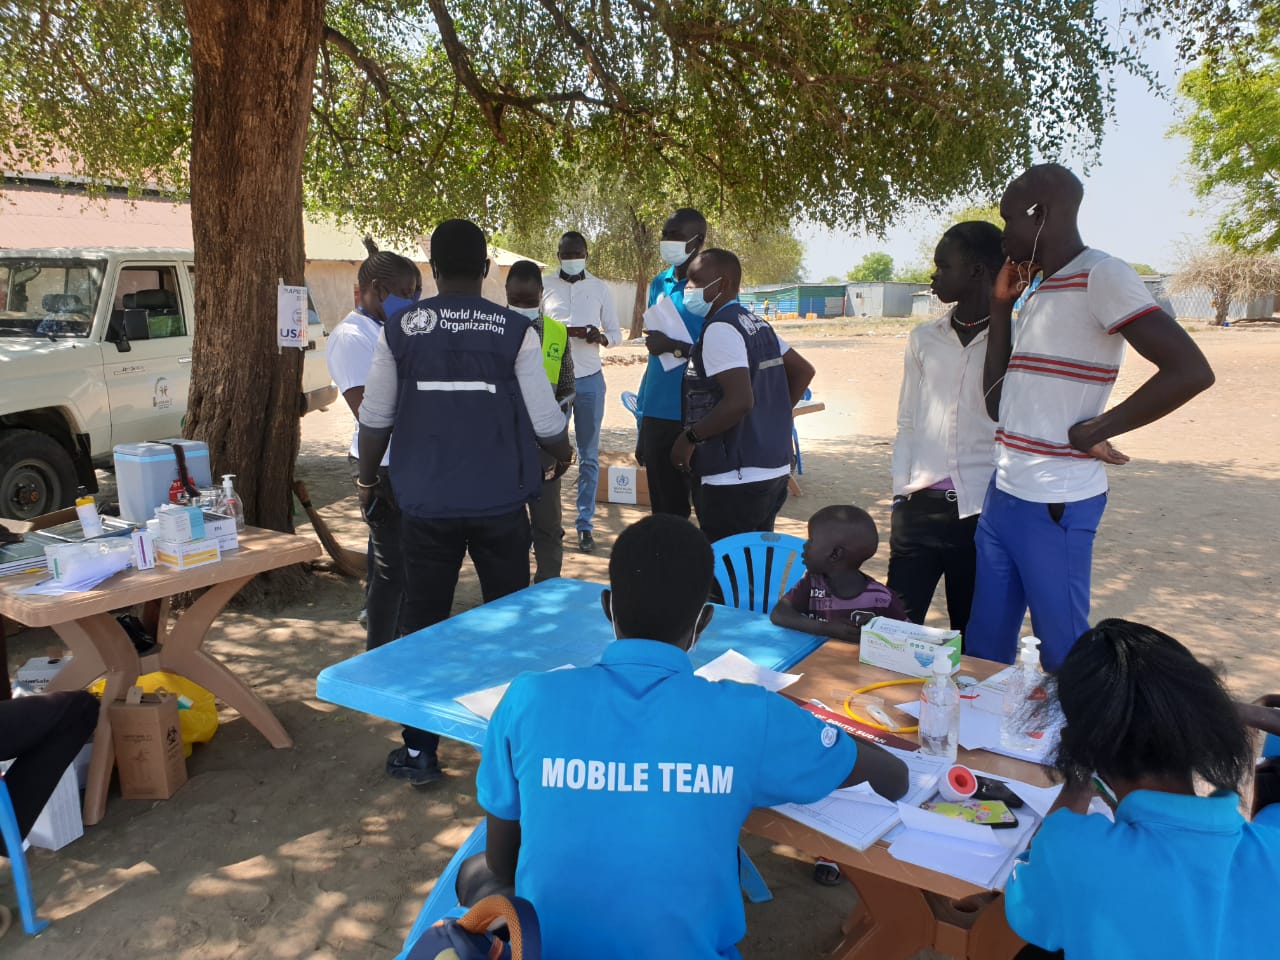 WHO’s mobile medical teams and partners provided life-saving health care services to those impacted by the floods.